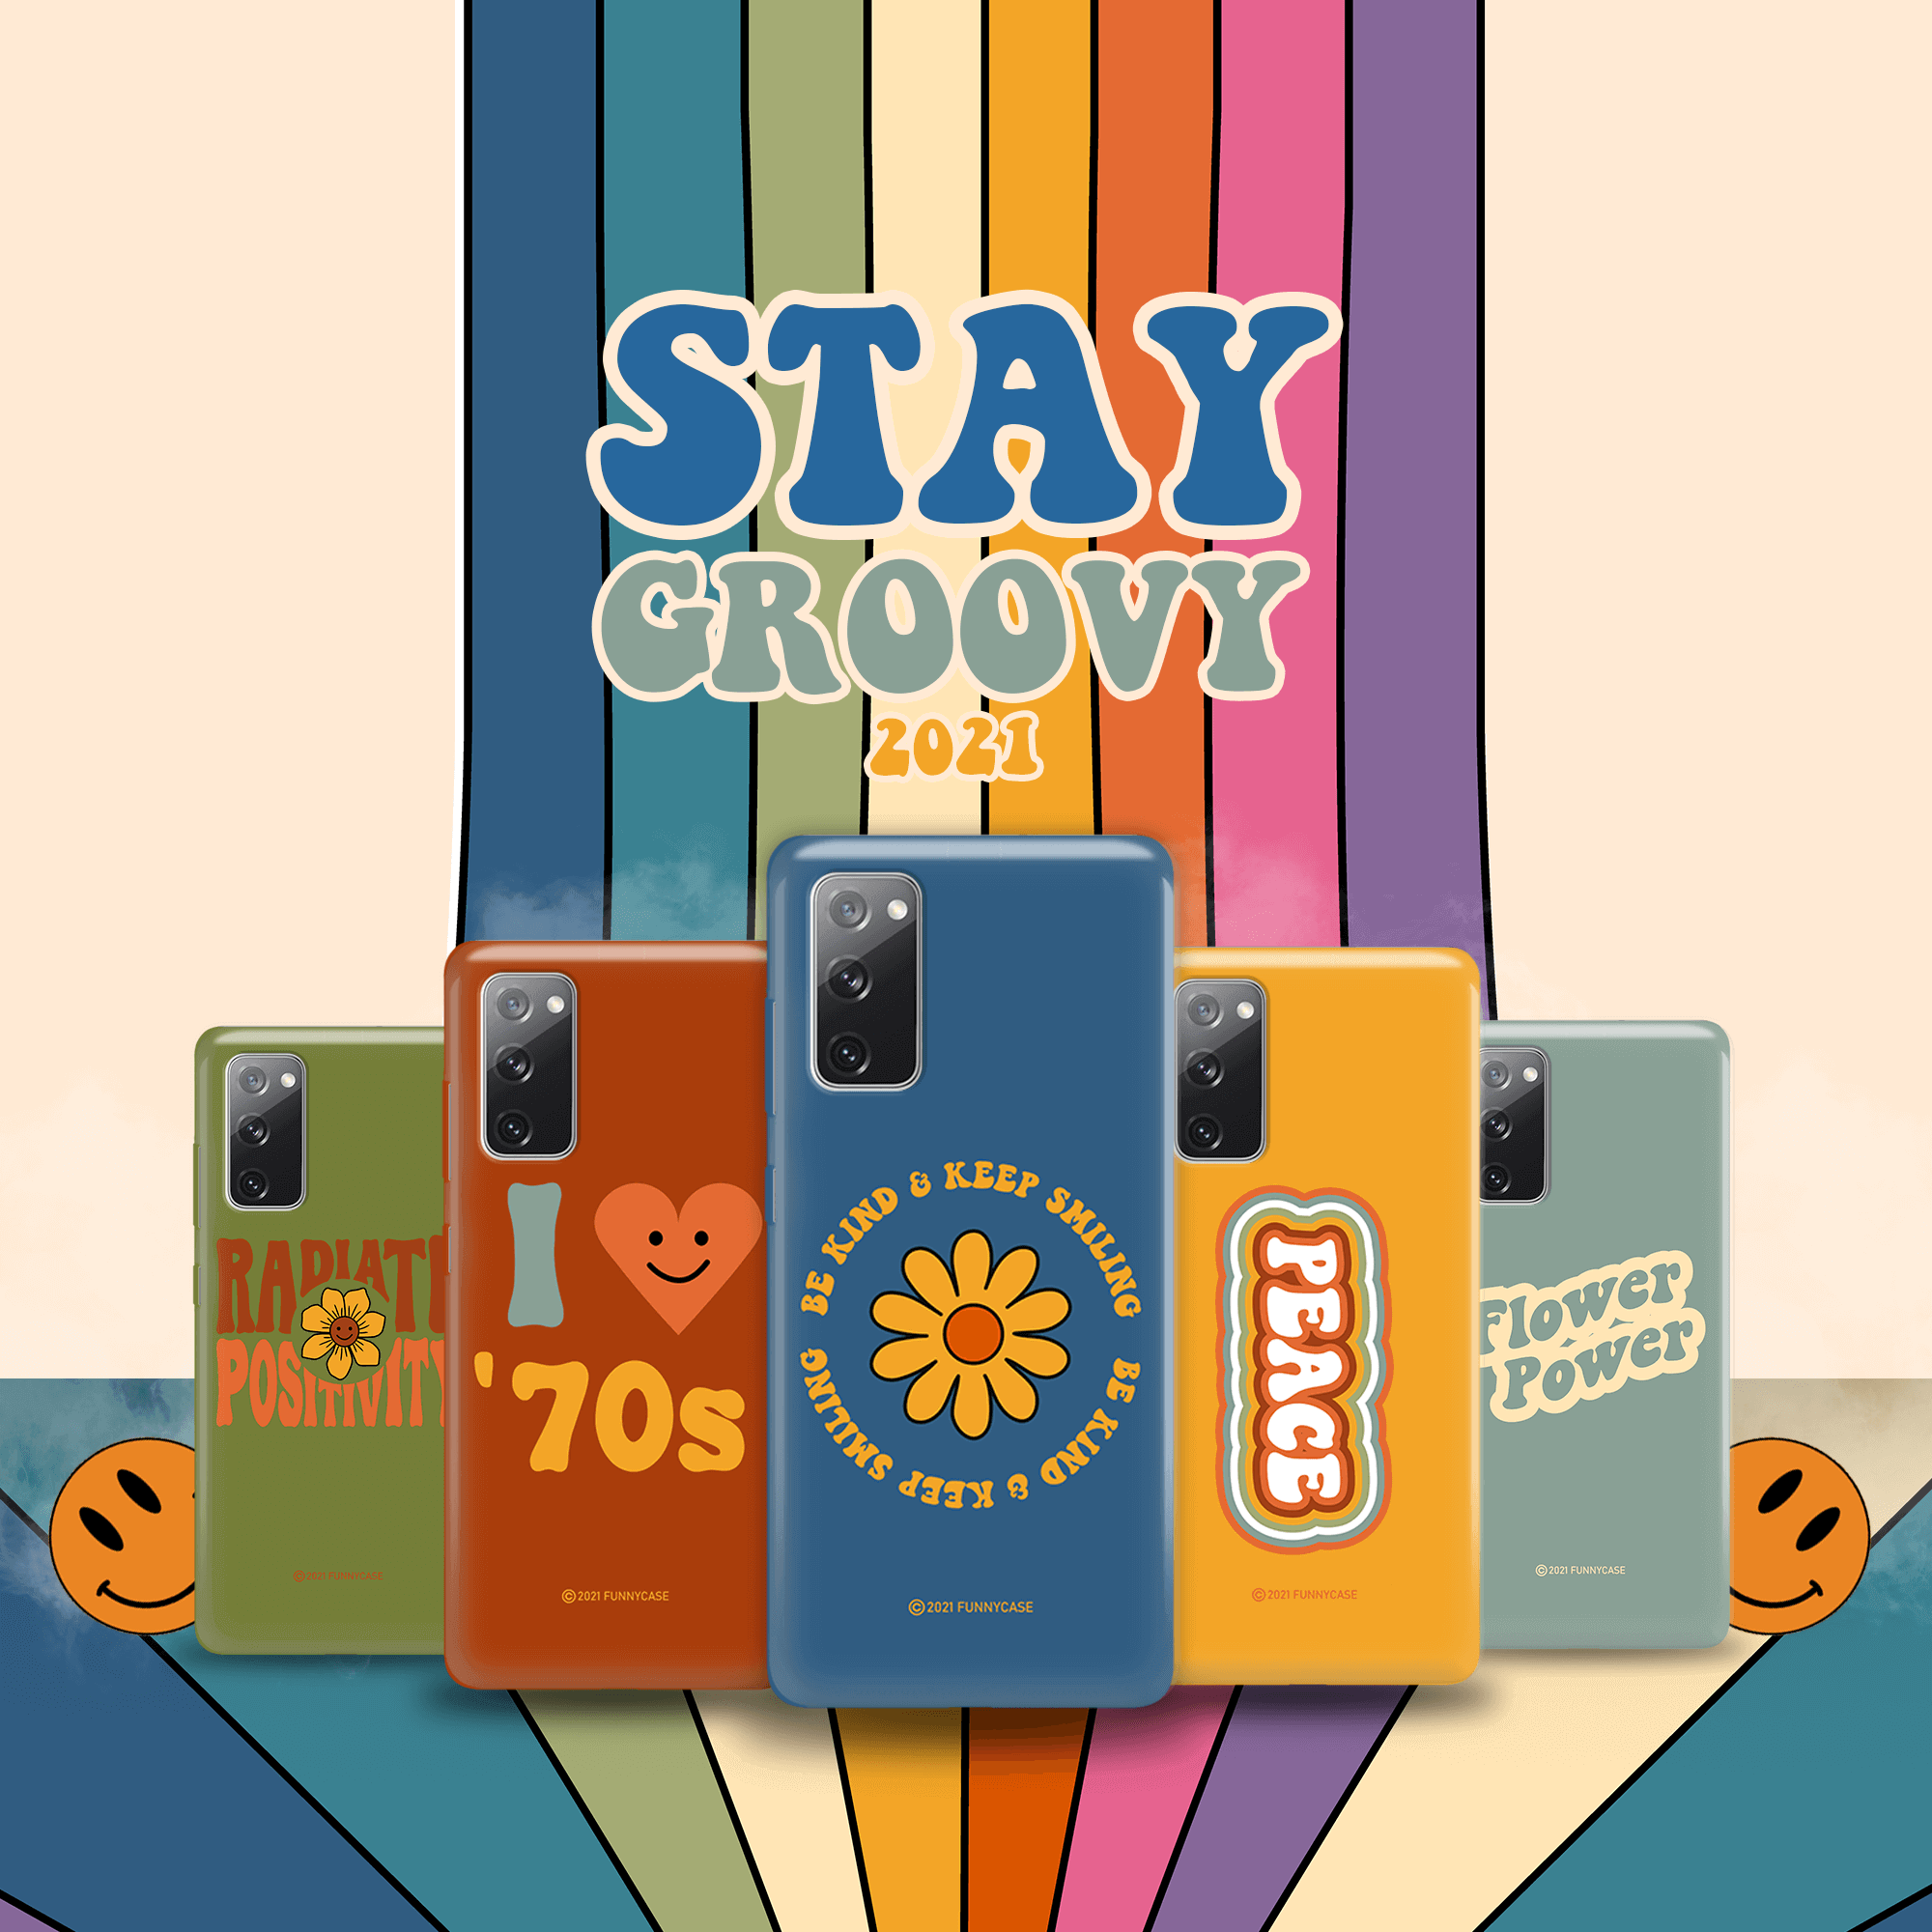 STAY GROOVY